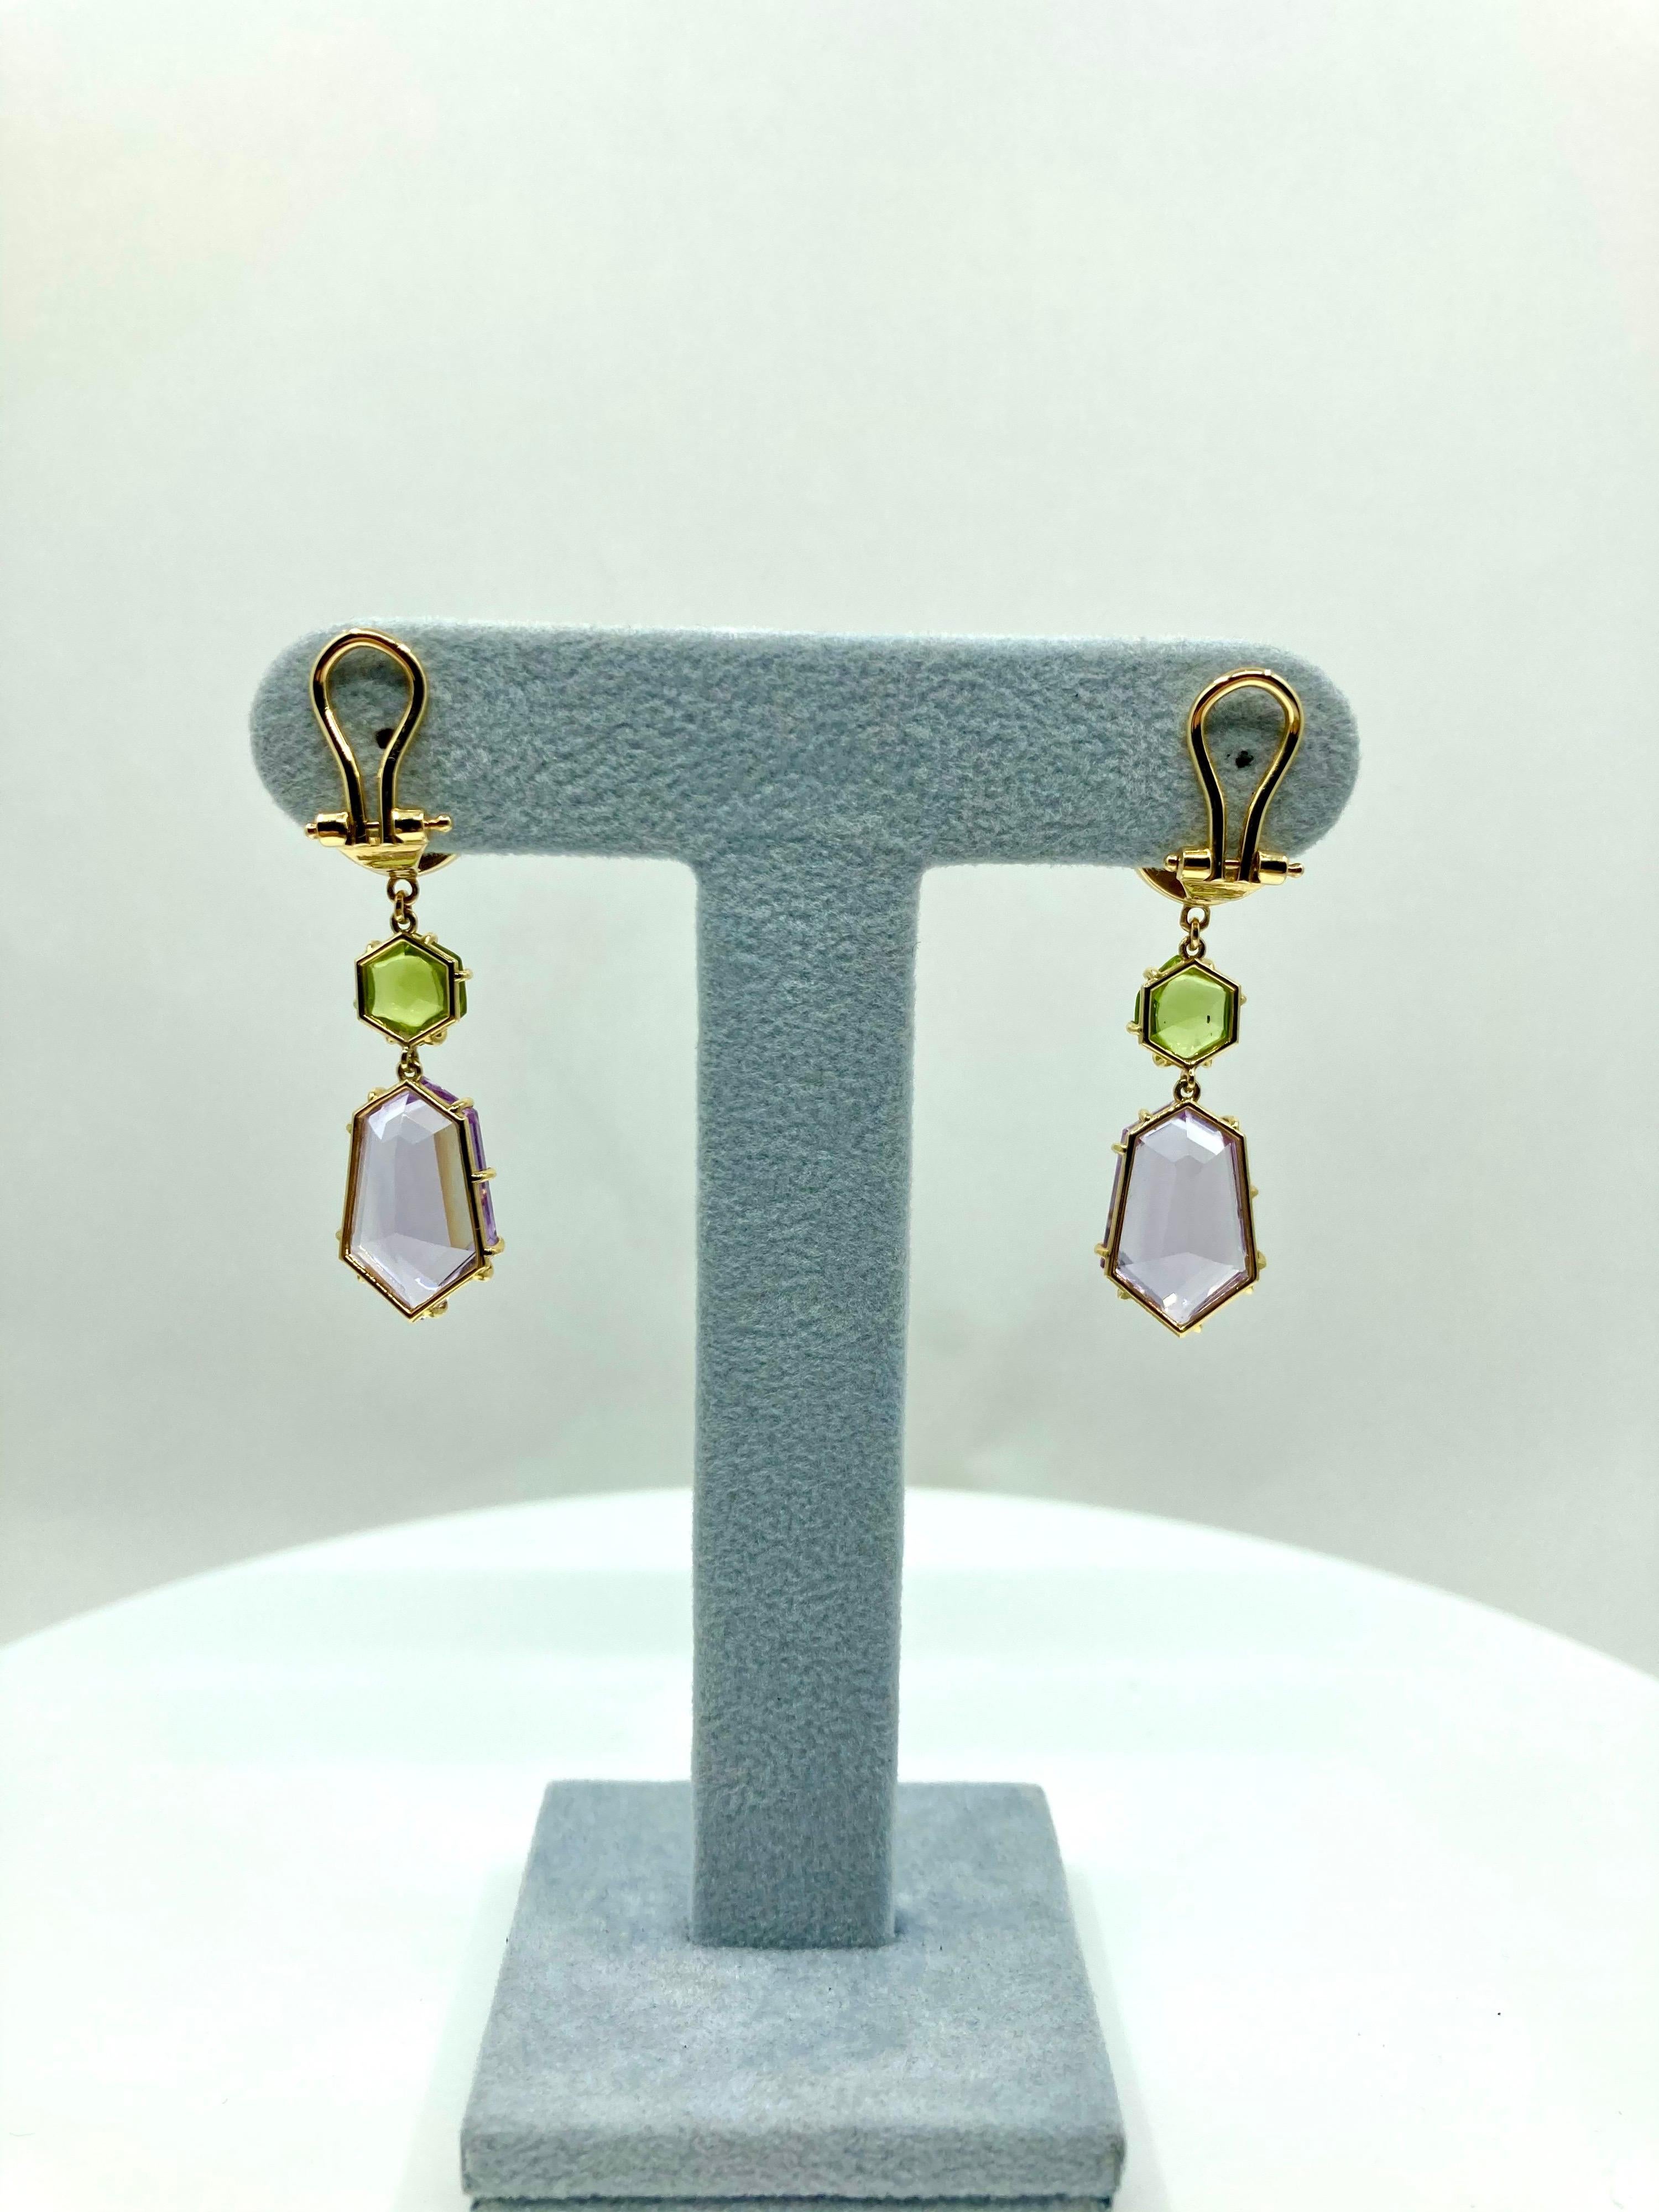 Timeless and elegant Yellow Gold earrings, with Amethyst ct. 13,50 and Peridot ct. 3,00, Made in Italy by Roberto Casarin. 

A timeless combination of pristine natural Amethyst and Peridot, with a design that will never be outdated and will show